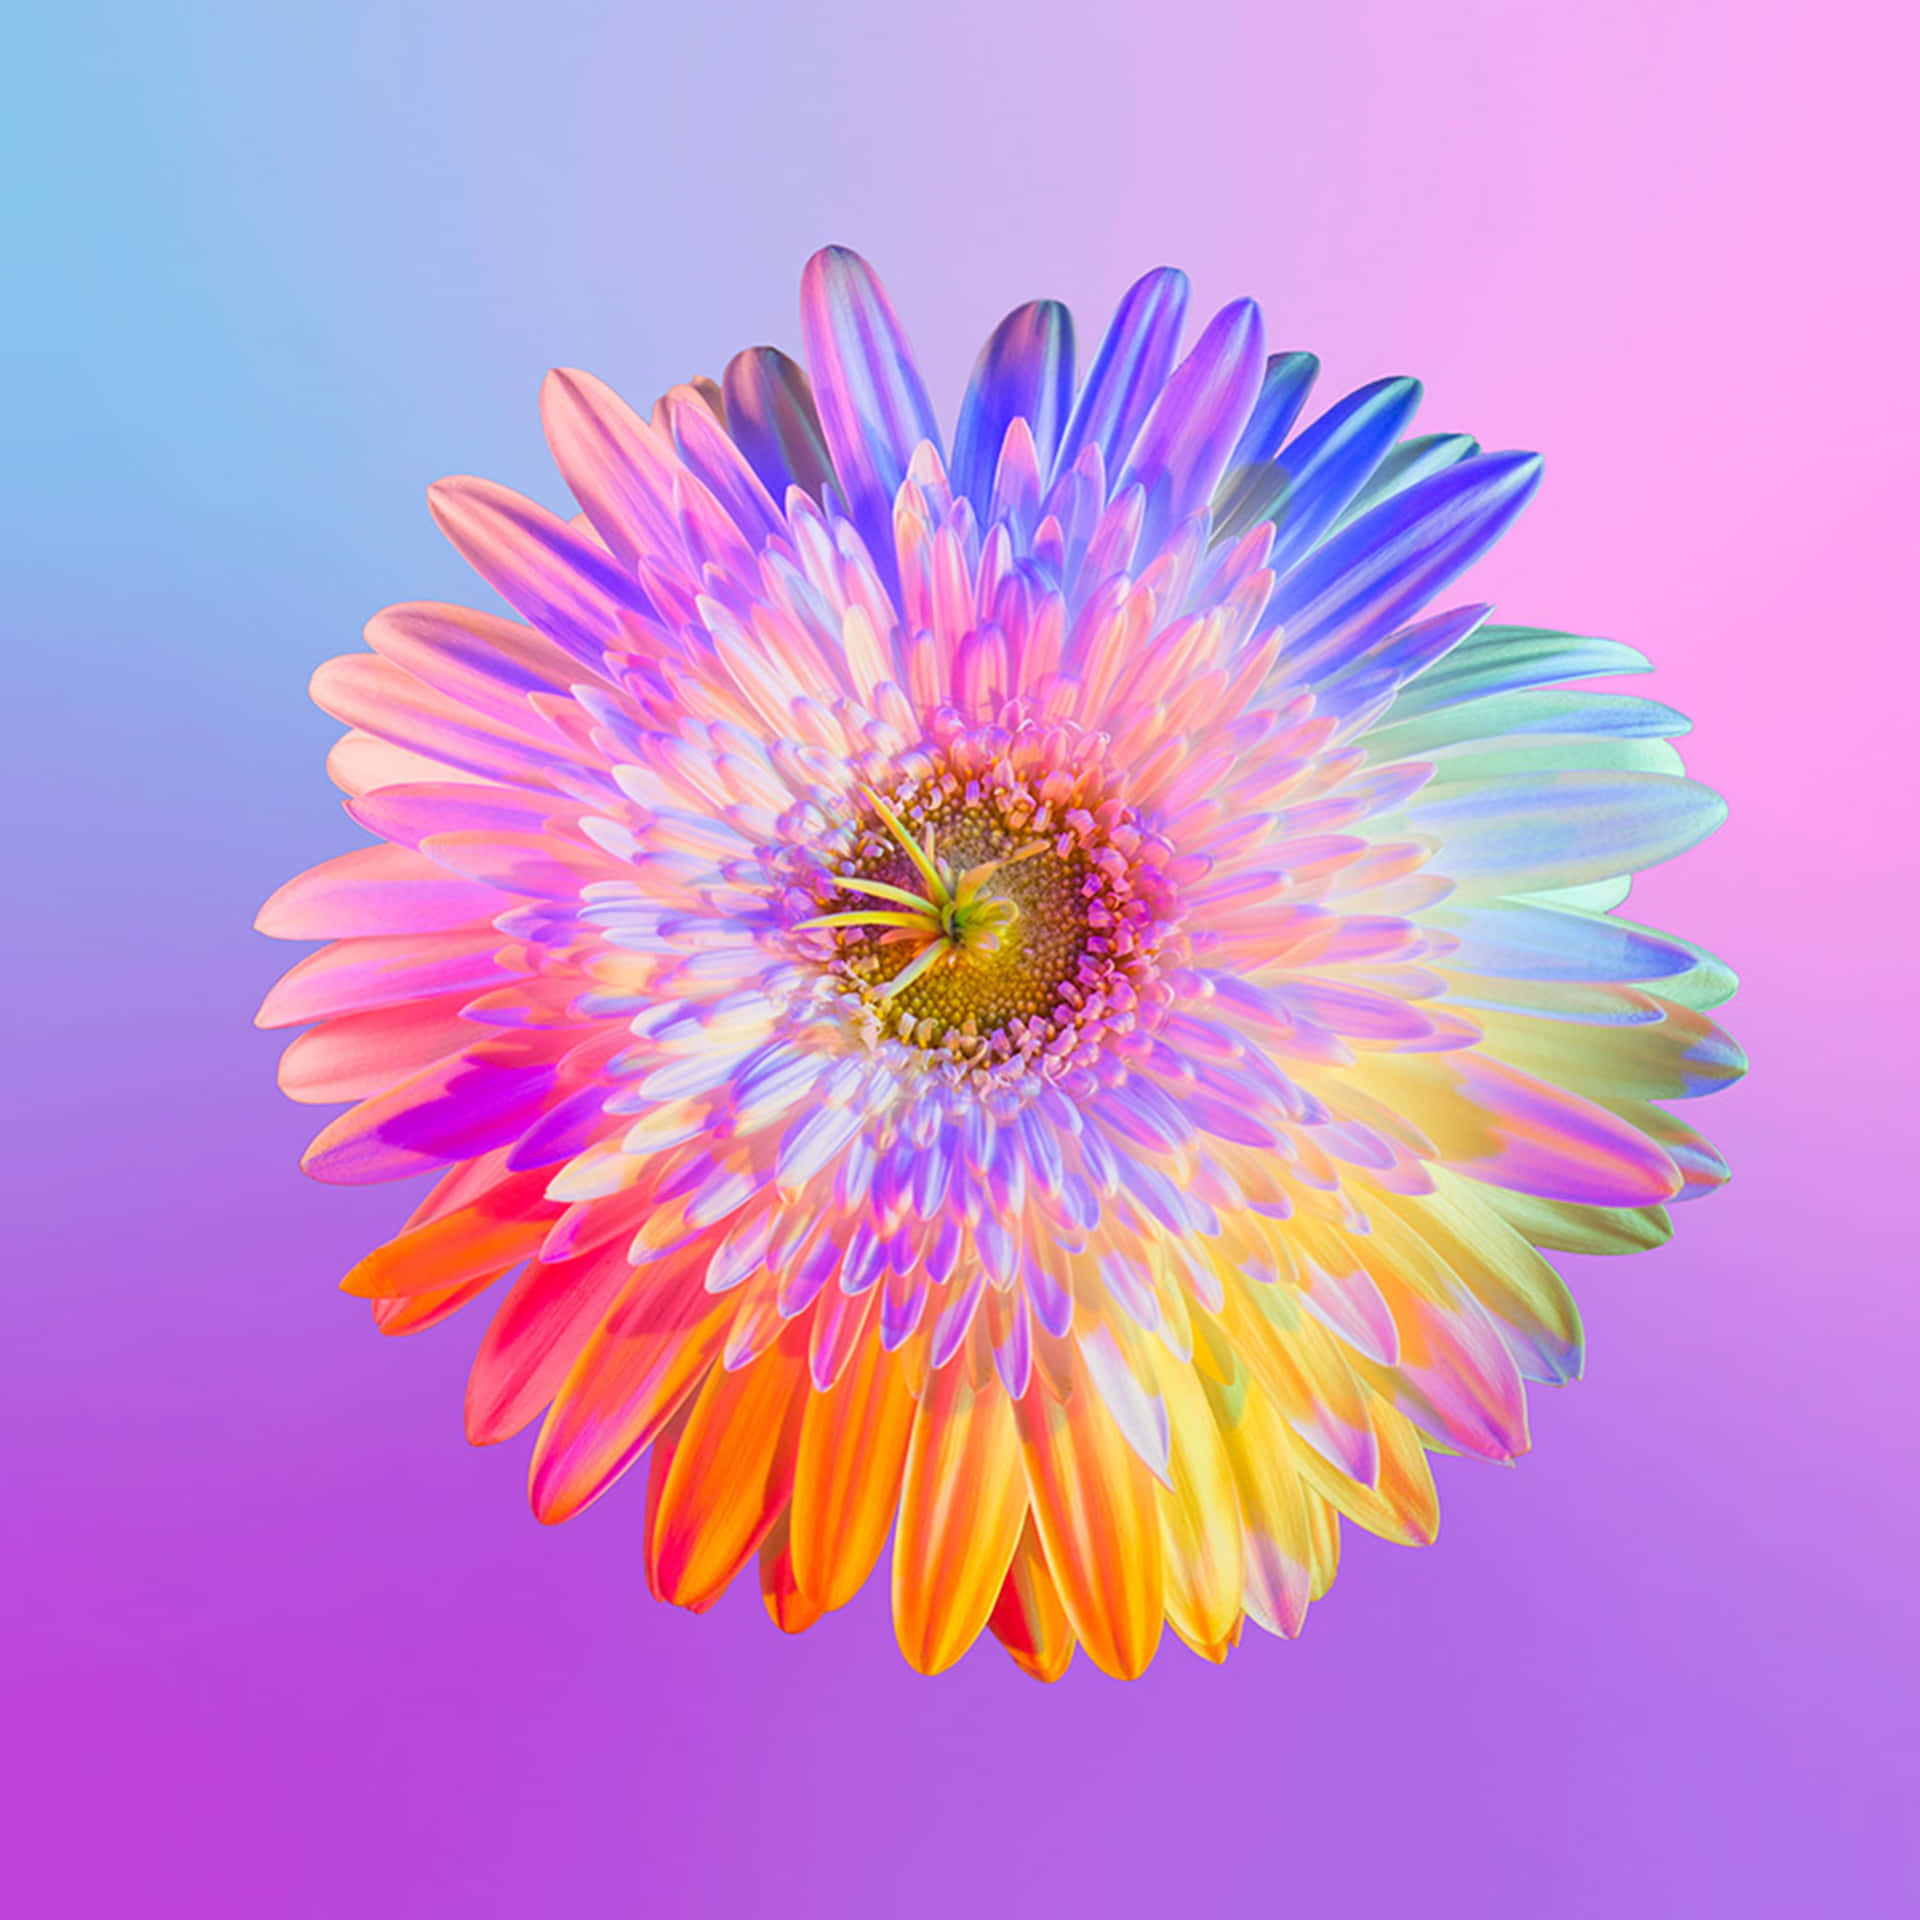 A Colorful Flower On A Pink And Purple Background Wallpaper